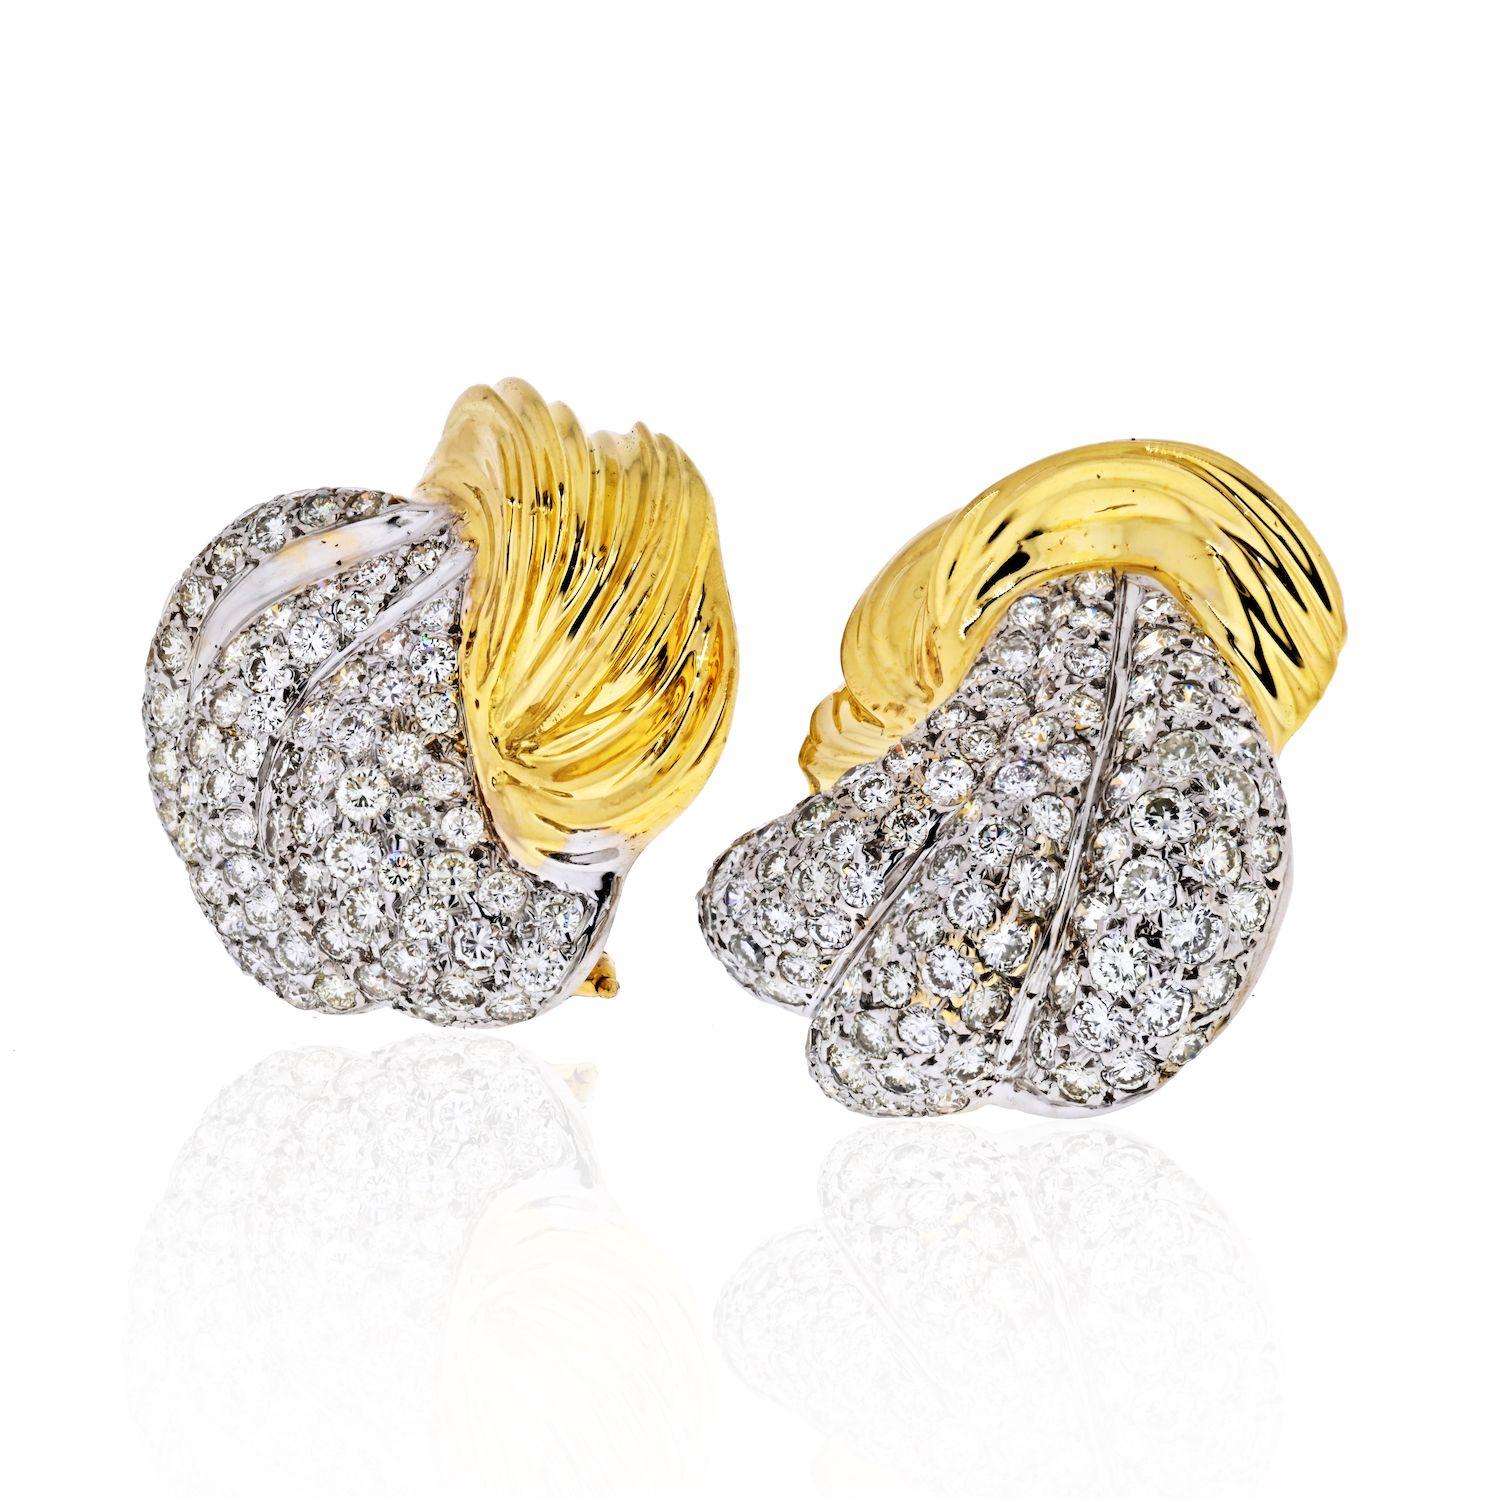 You cannot go wrong with these 18K Two Tone 9.50 carat Large Fluted Estate Diamond Clip Earrings set with over 200 round cut diamonds of about 9.50 carats in total diamonds weight. 
